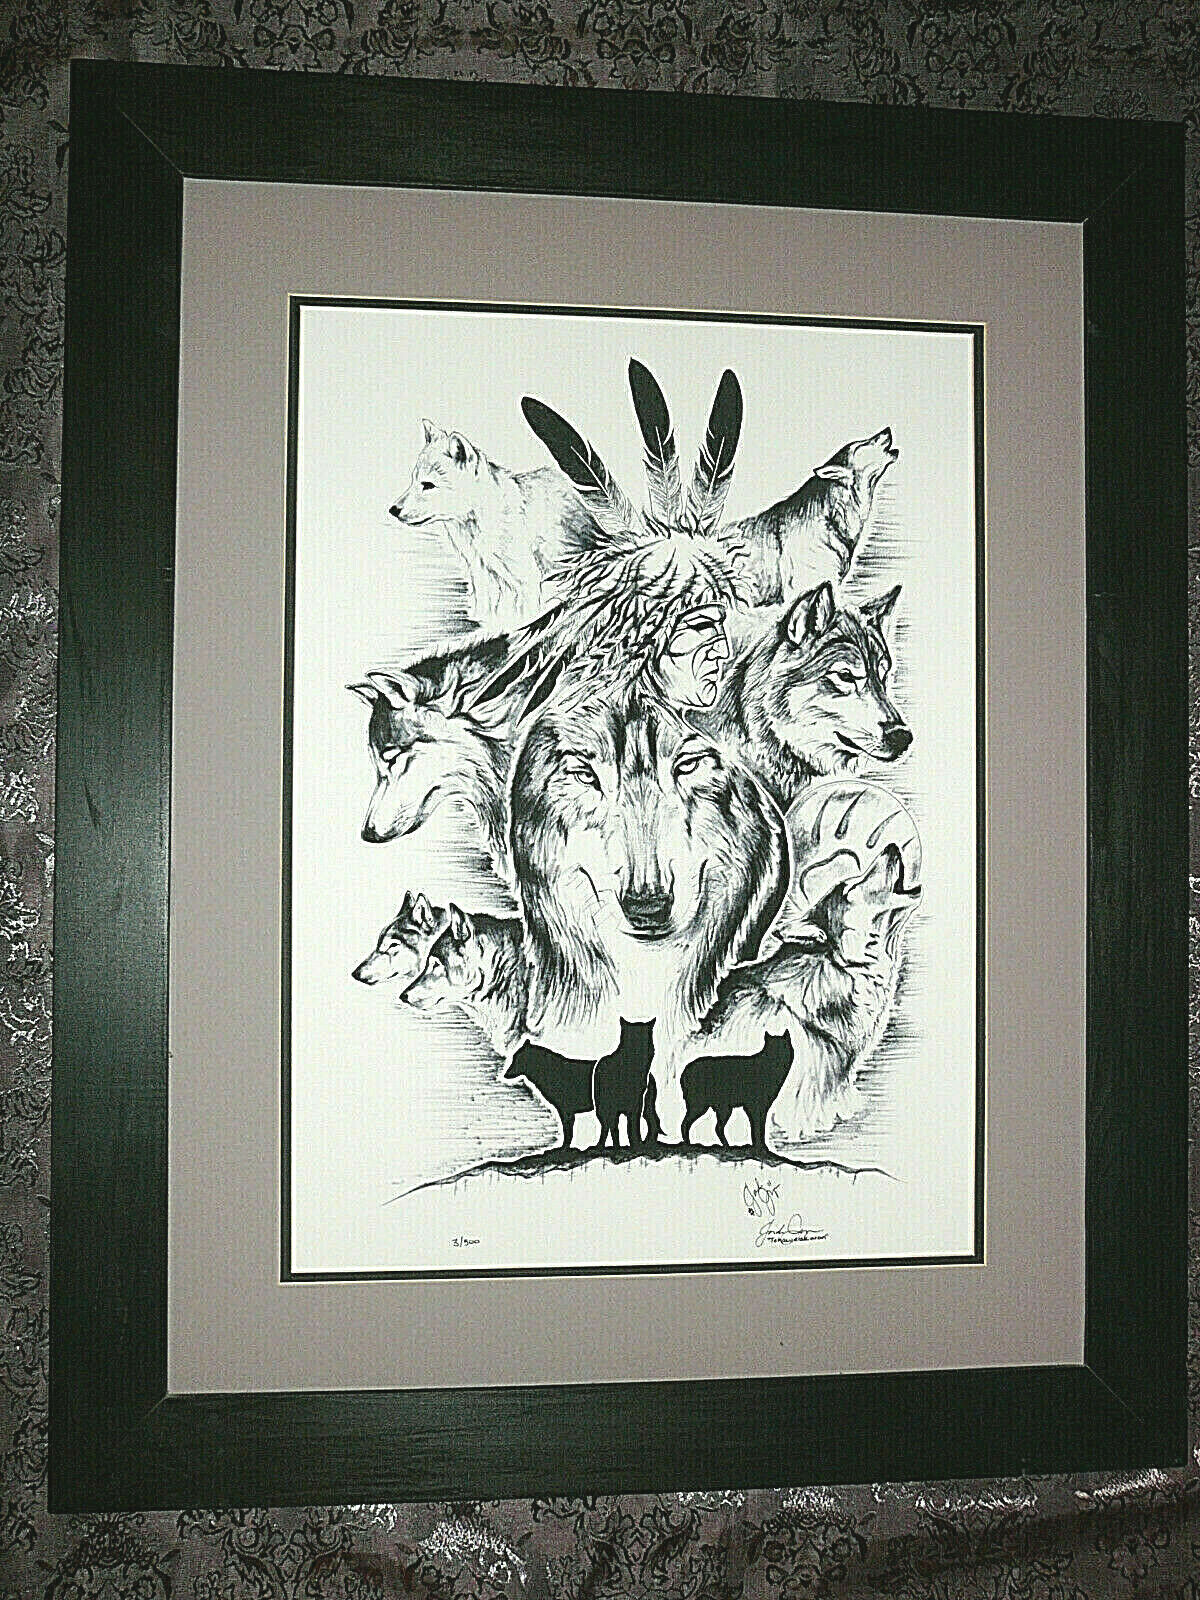 Superb Black & White Ink Lithograph by Canadian Native Artist, Signed & Numbered